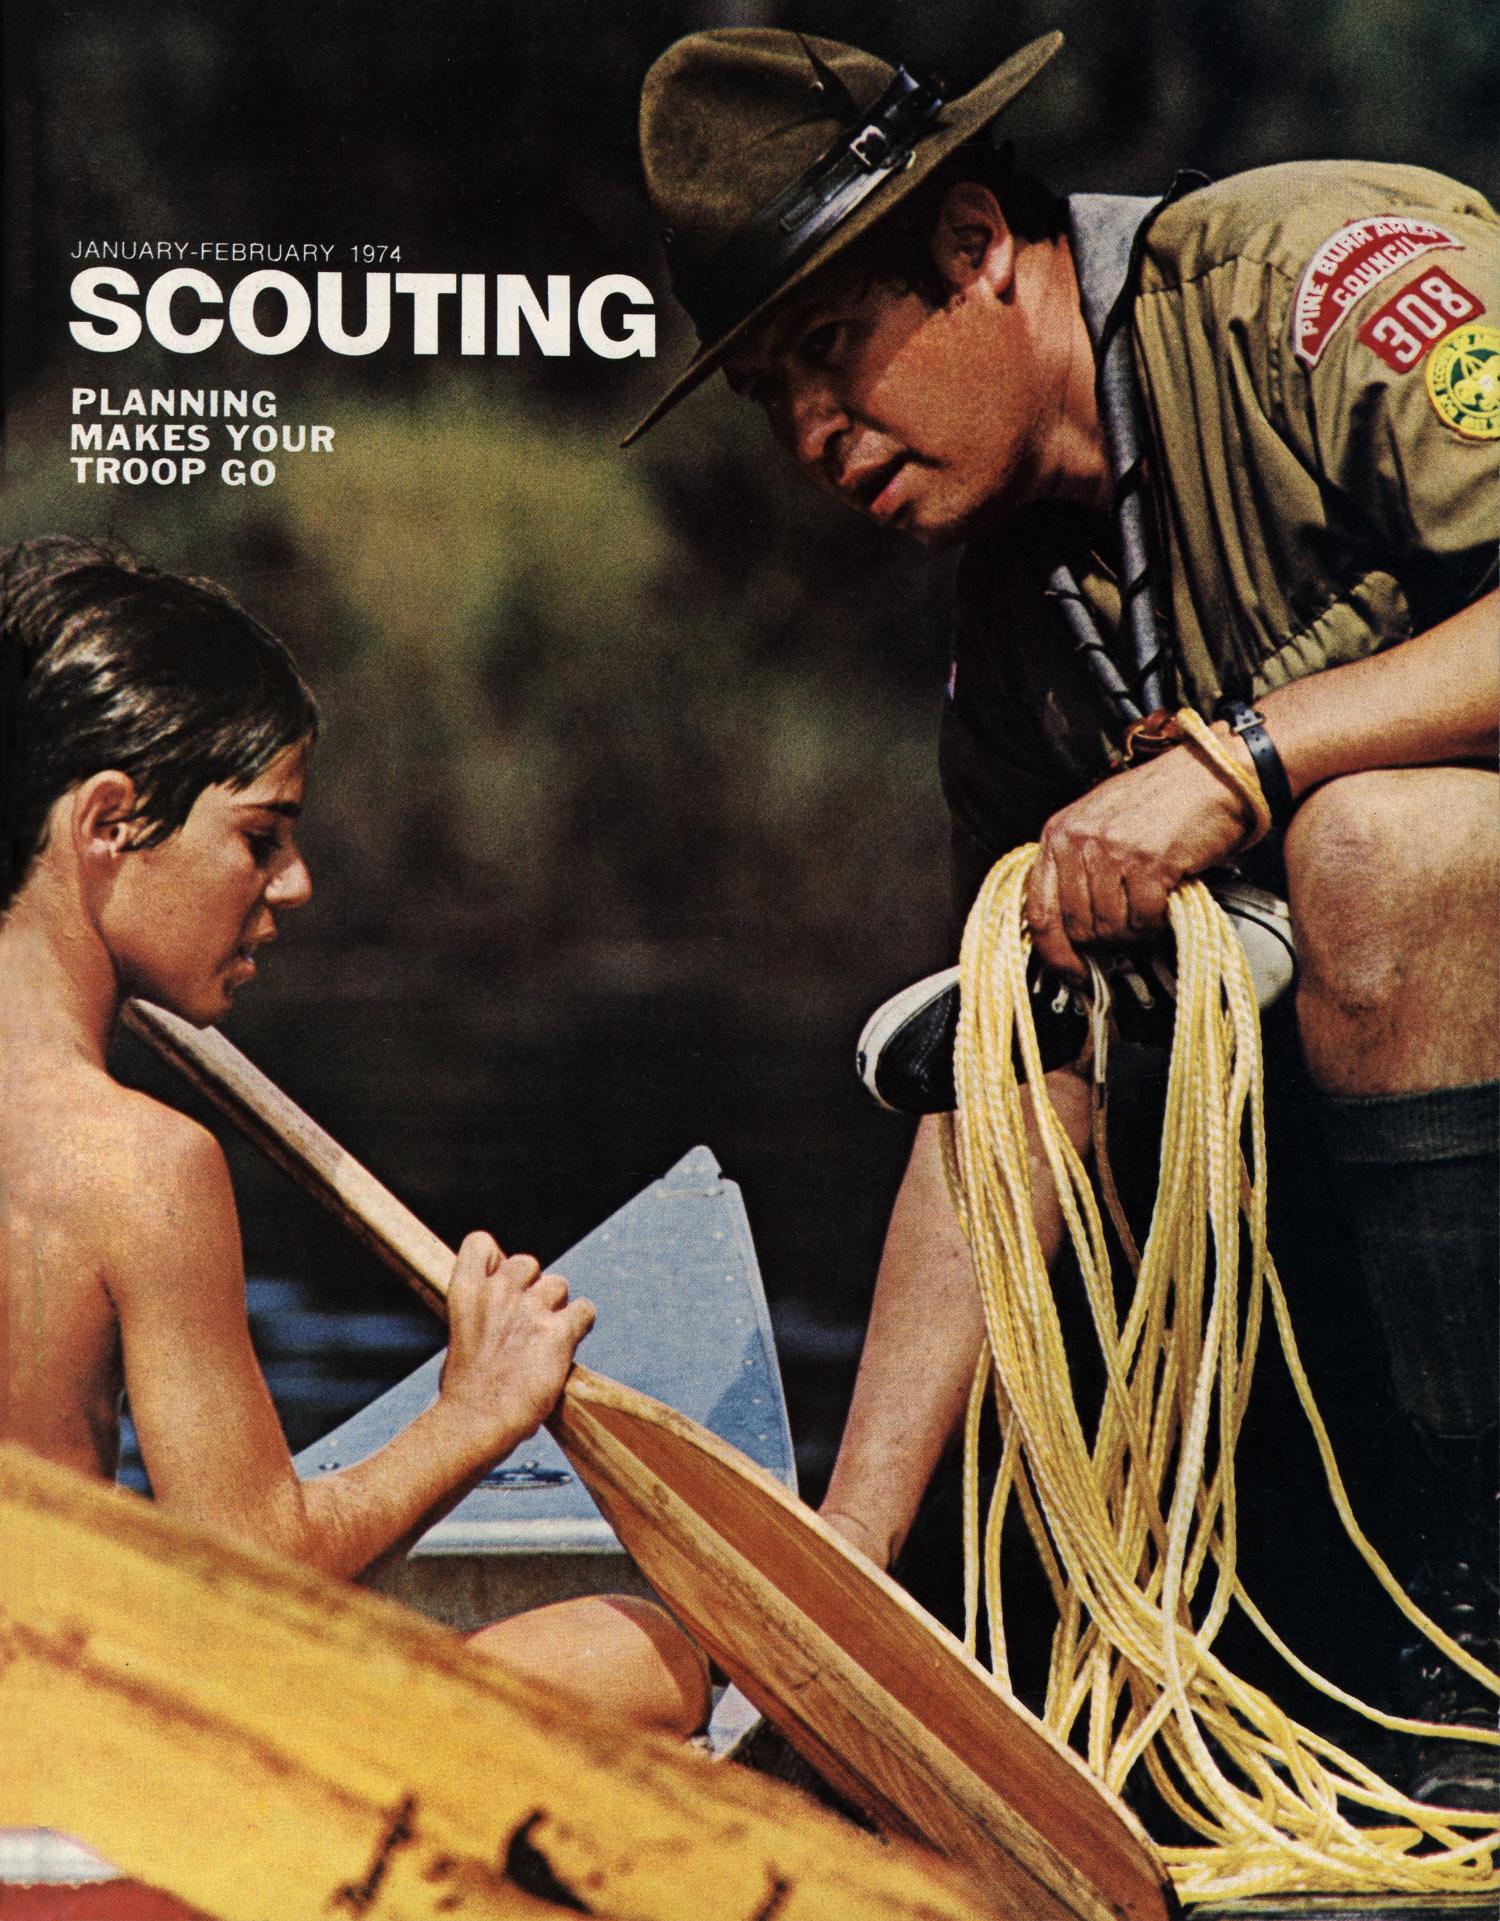 Scouting, Volume 62, Number 1, January-February 1974
                                                
                                                    Front Cover
                                                